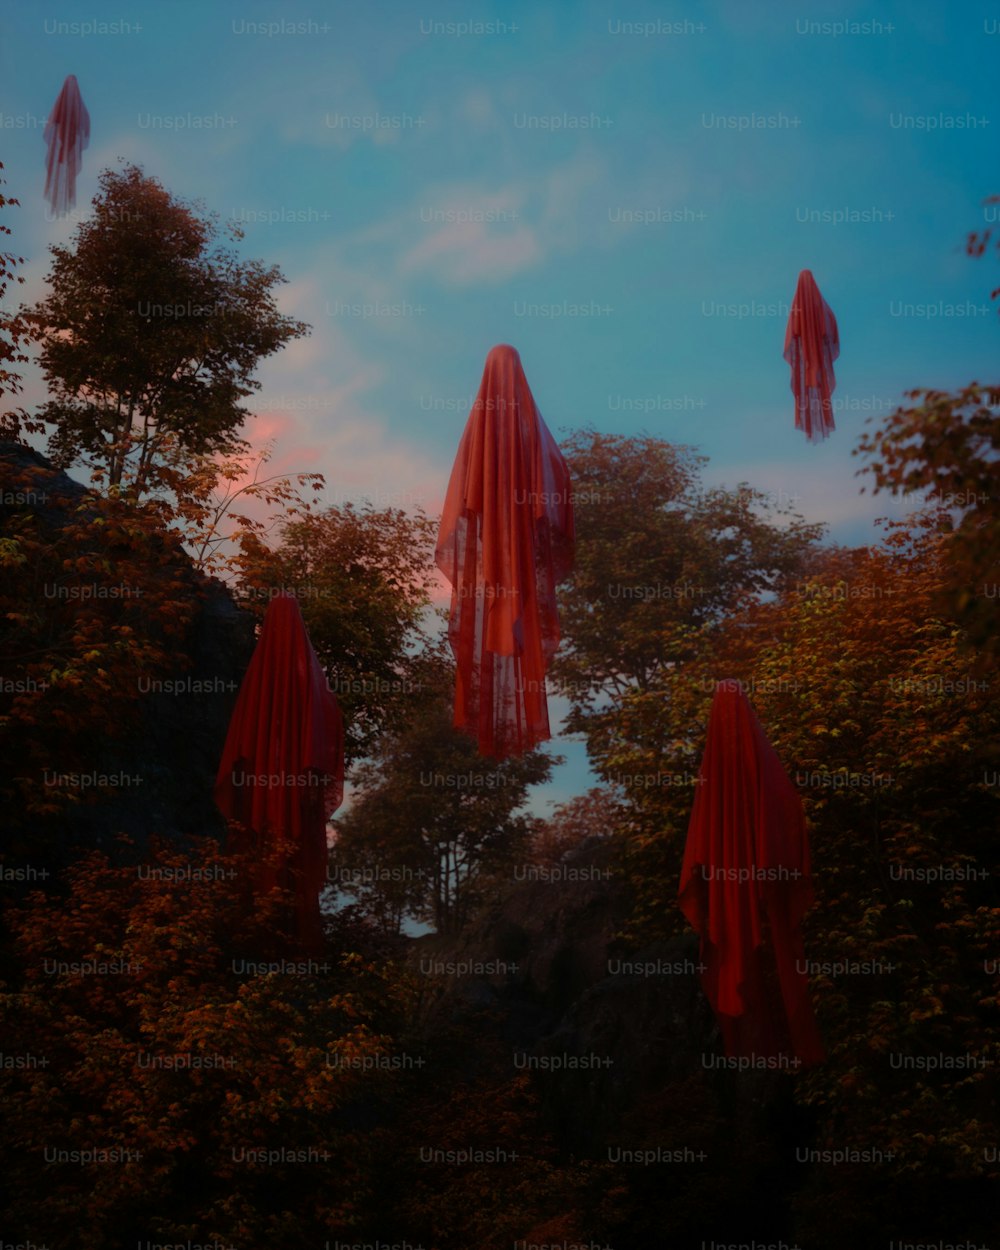 a group of red umbrellas floating in the air